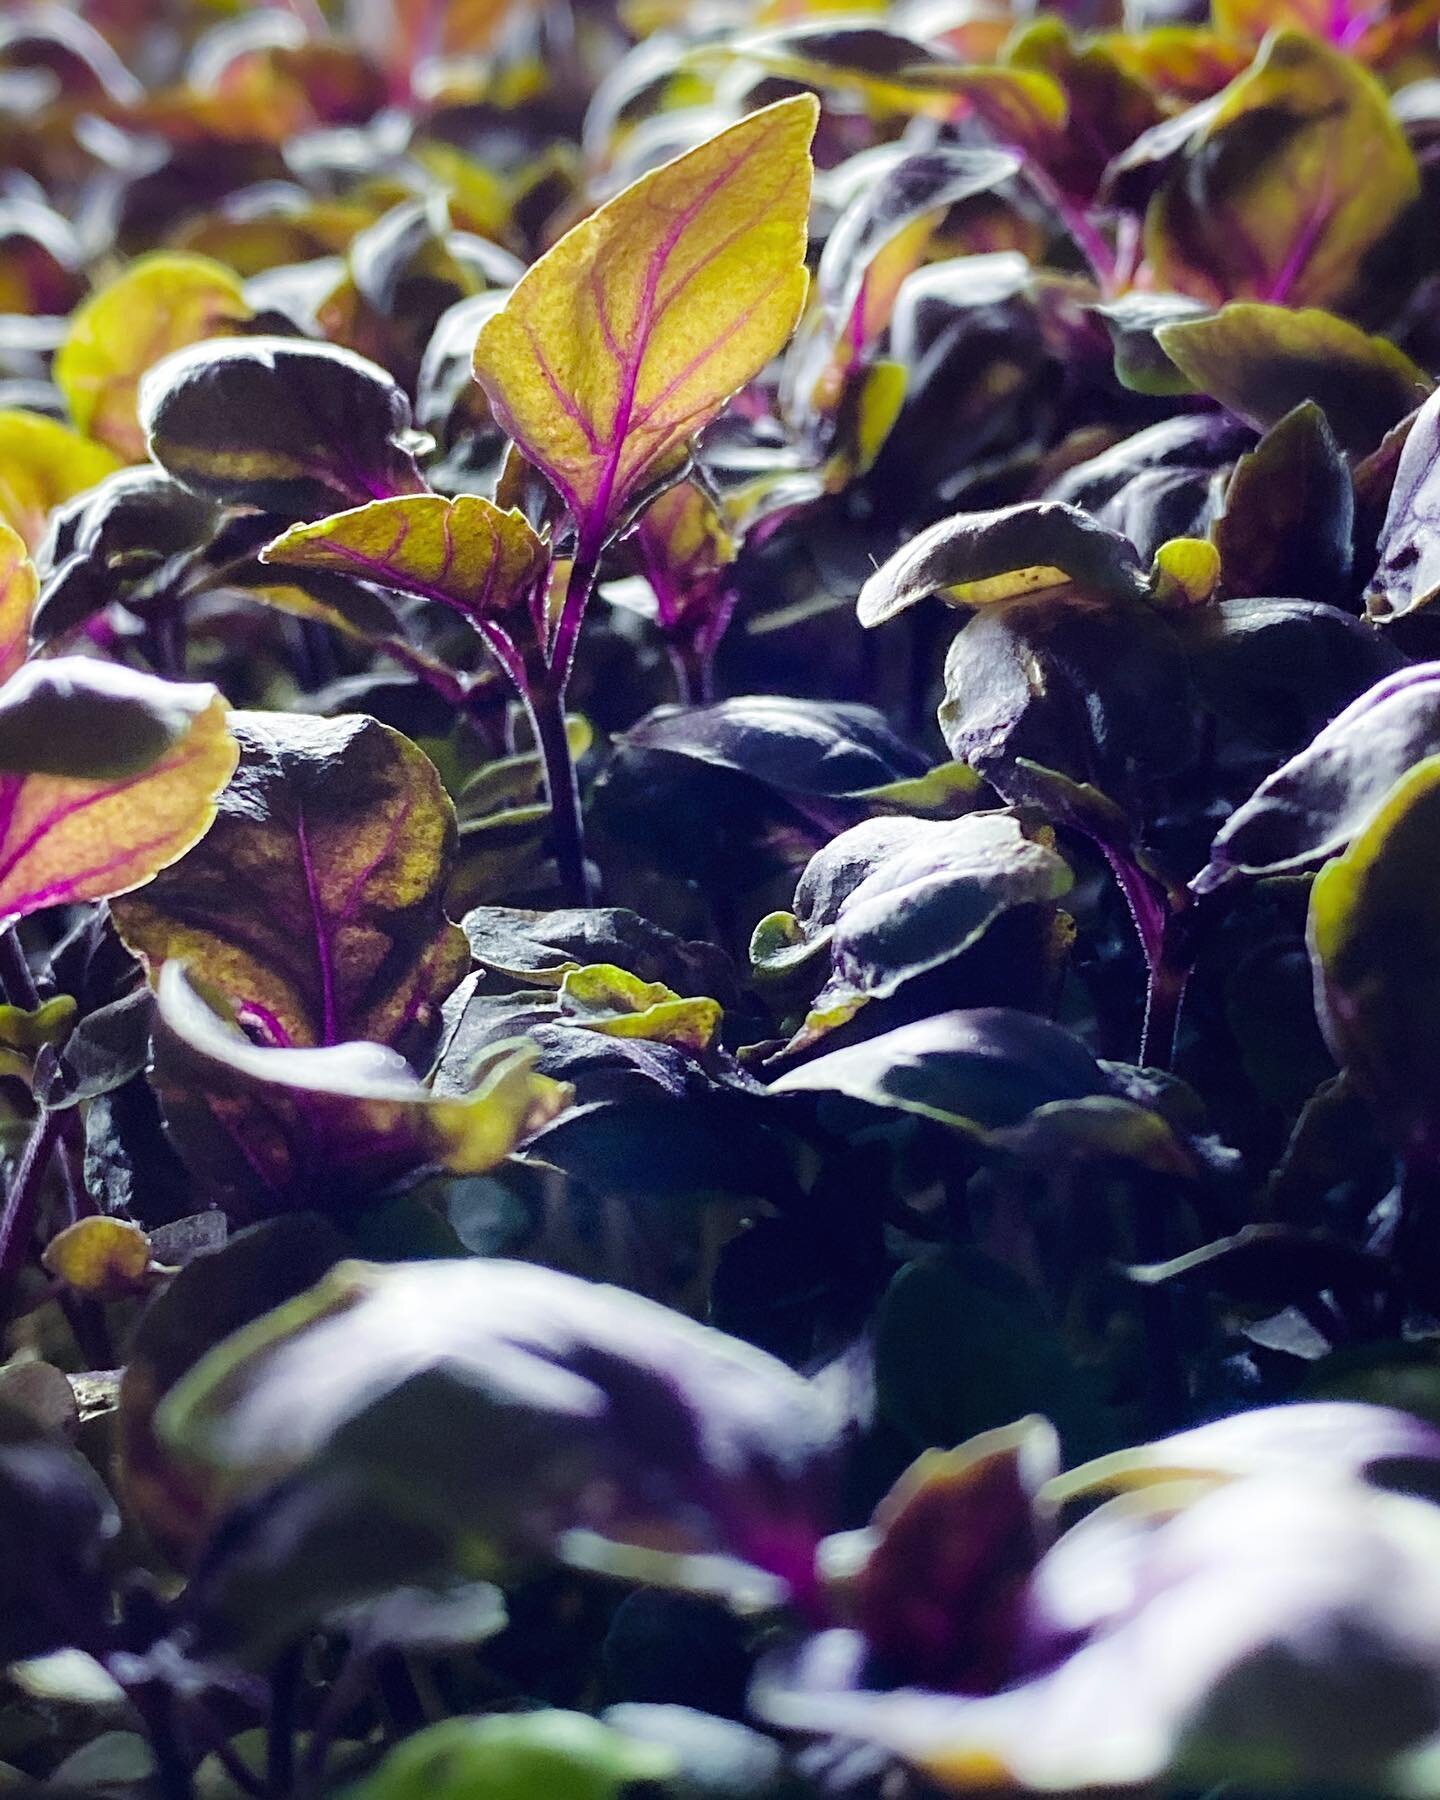 Inner beauty always stands out. 
.
Beautiful how the light shines through this leaf, bringing out the pretty purple within the vein of this striking micro opal basil. We&rsquo;re so blessed to share this beauty with you all. Your love and support is 